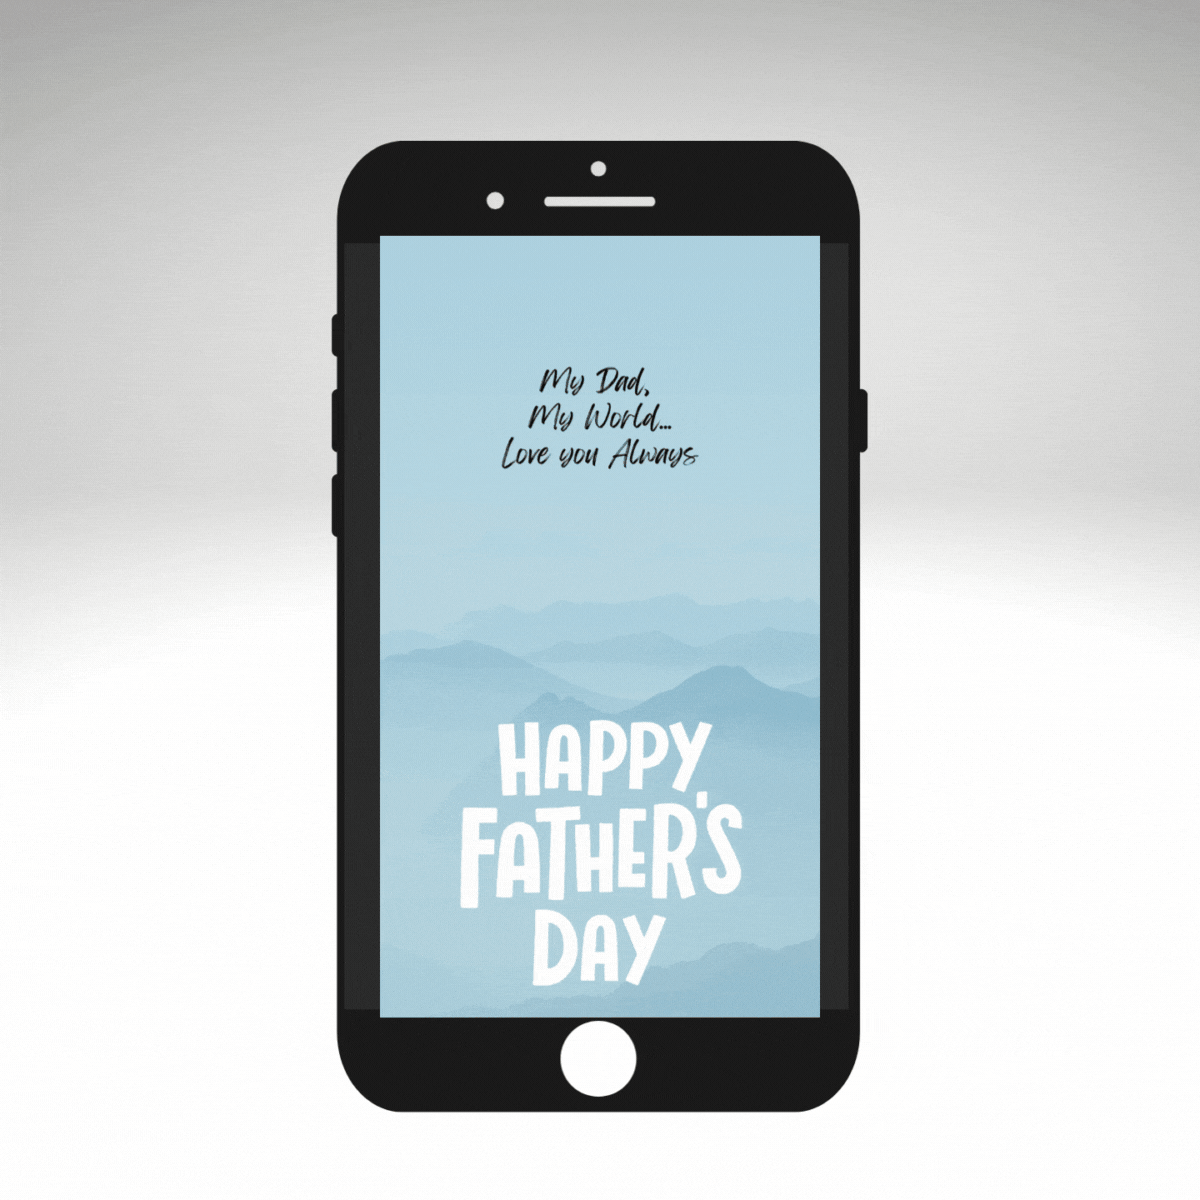 Fathers Day E-Card - Hot Air Balloon Mobile Phone Message